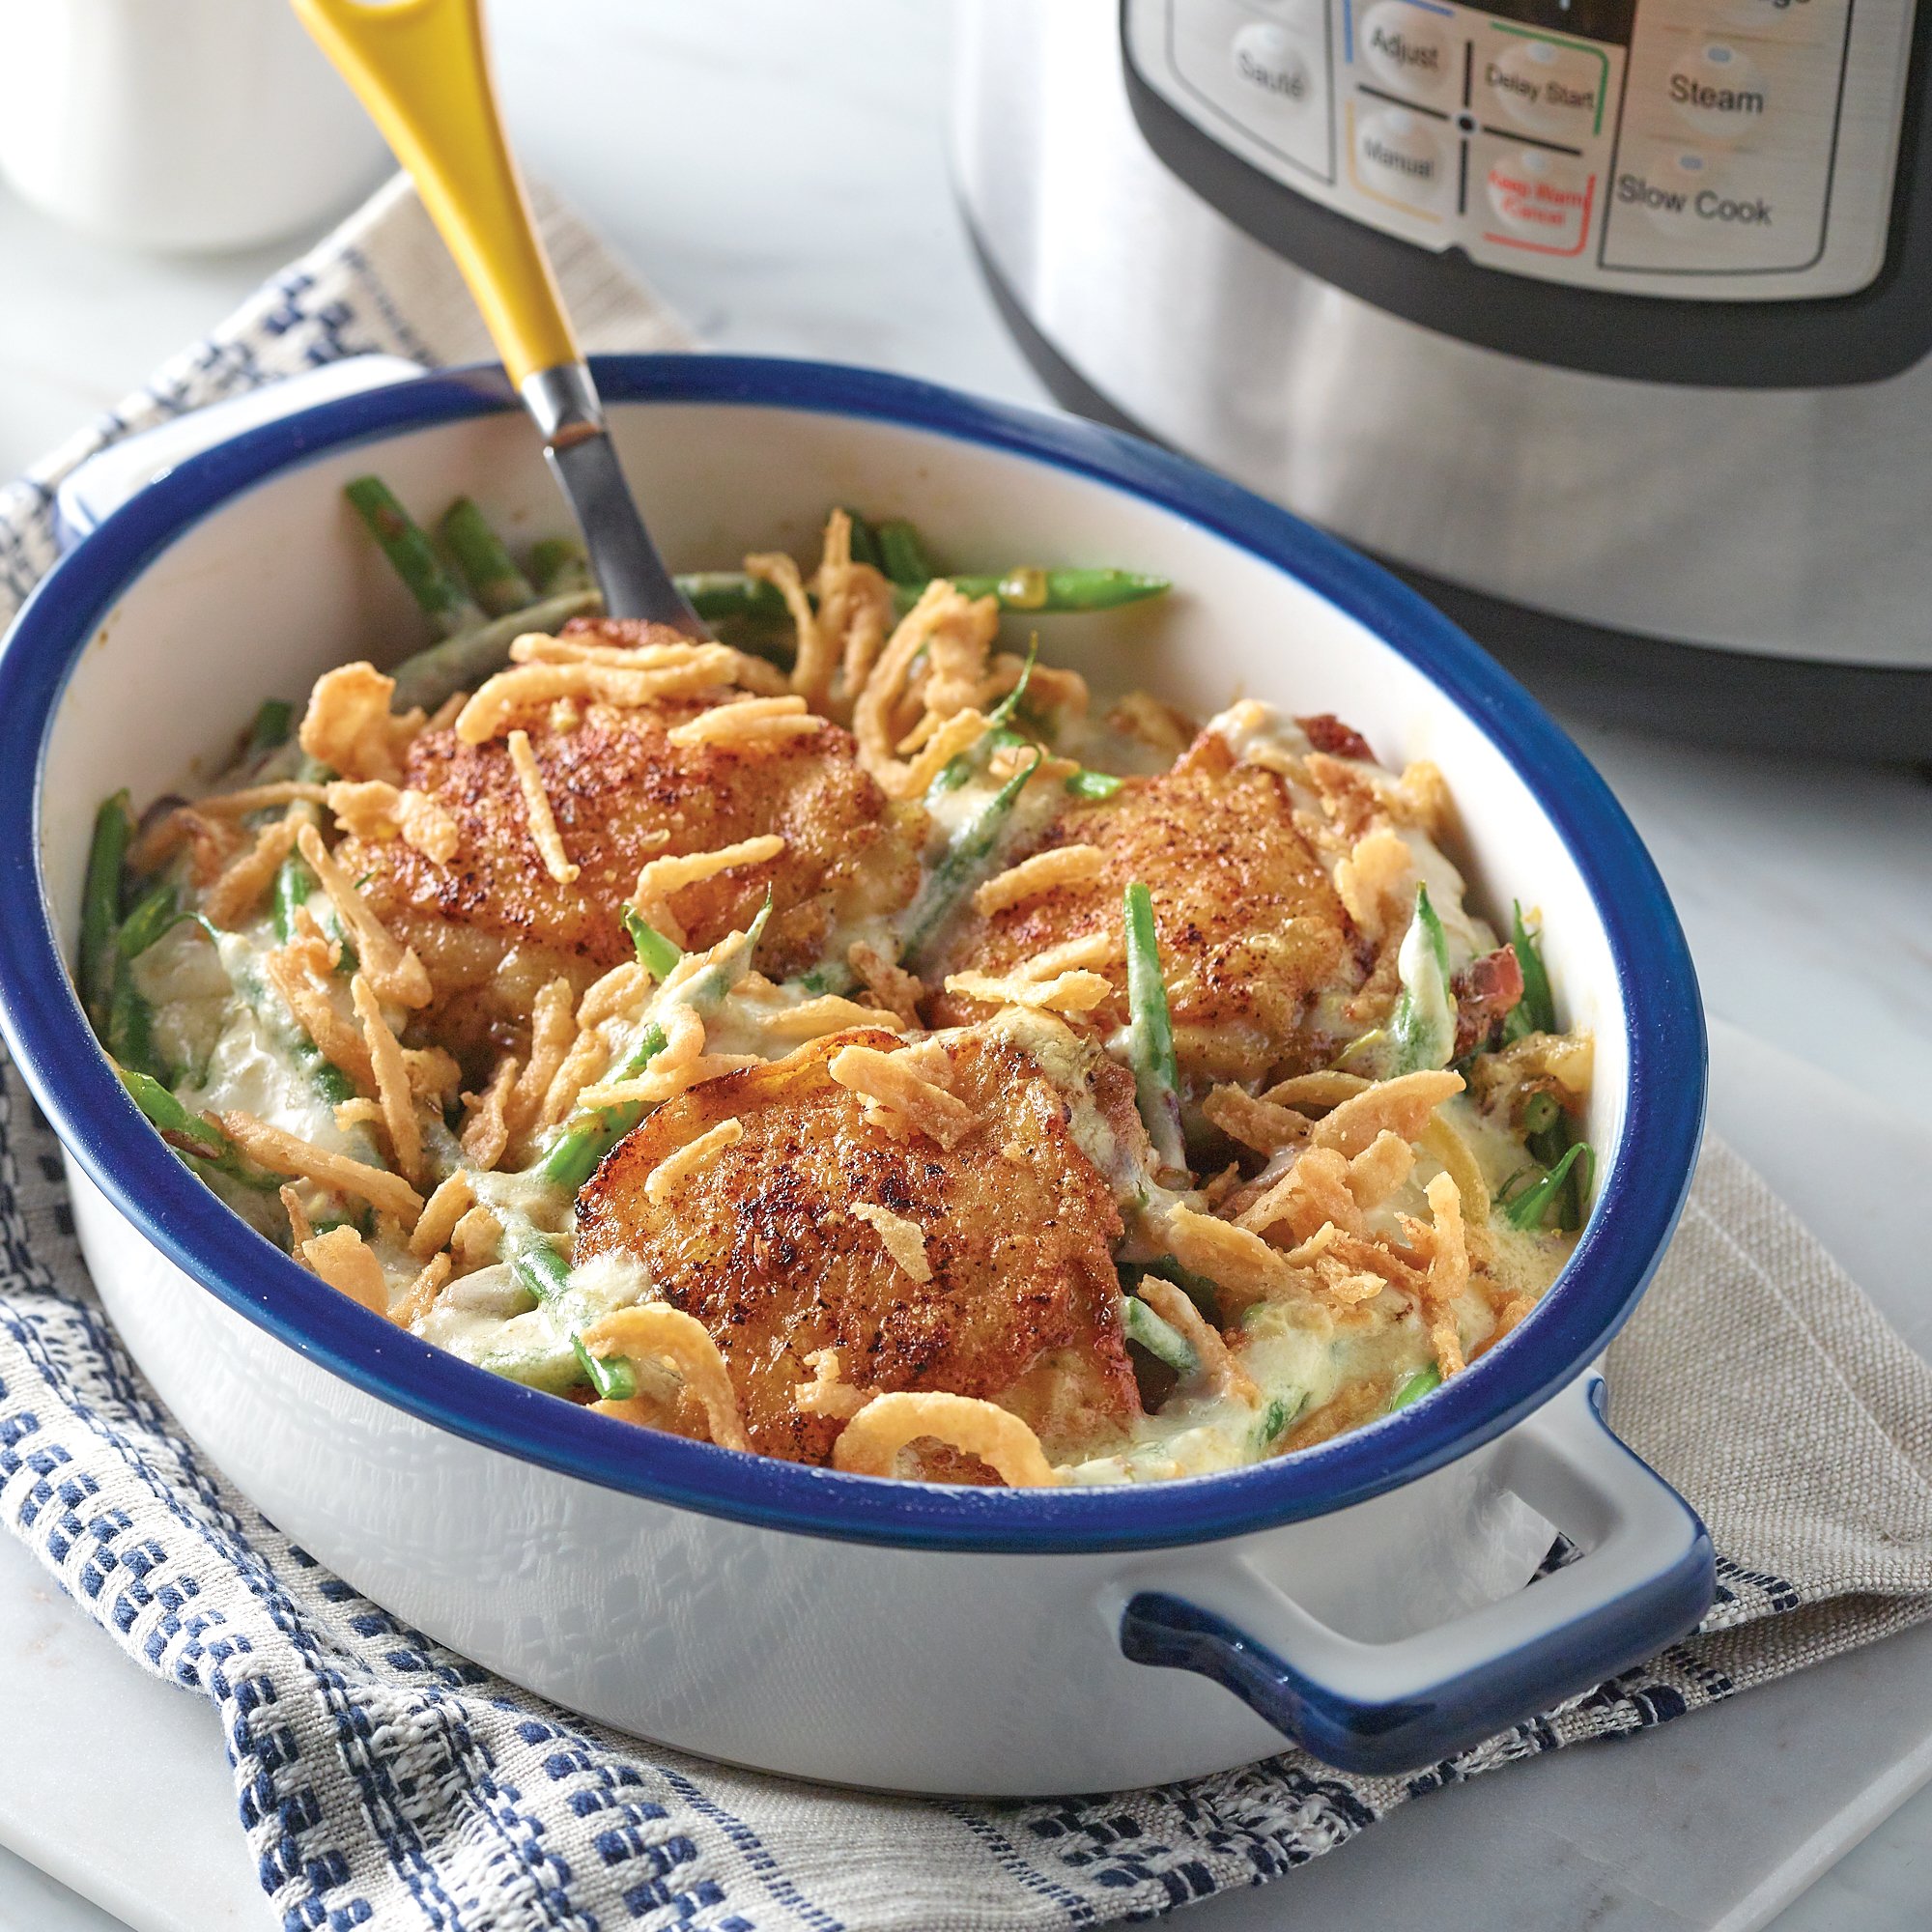 https://images.heb.com/is/image/HEBGrocery/Test/instant-pot-chicken-and-green-bean-casserole-recipe.jpg